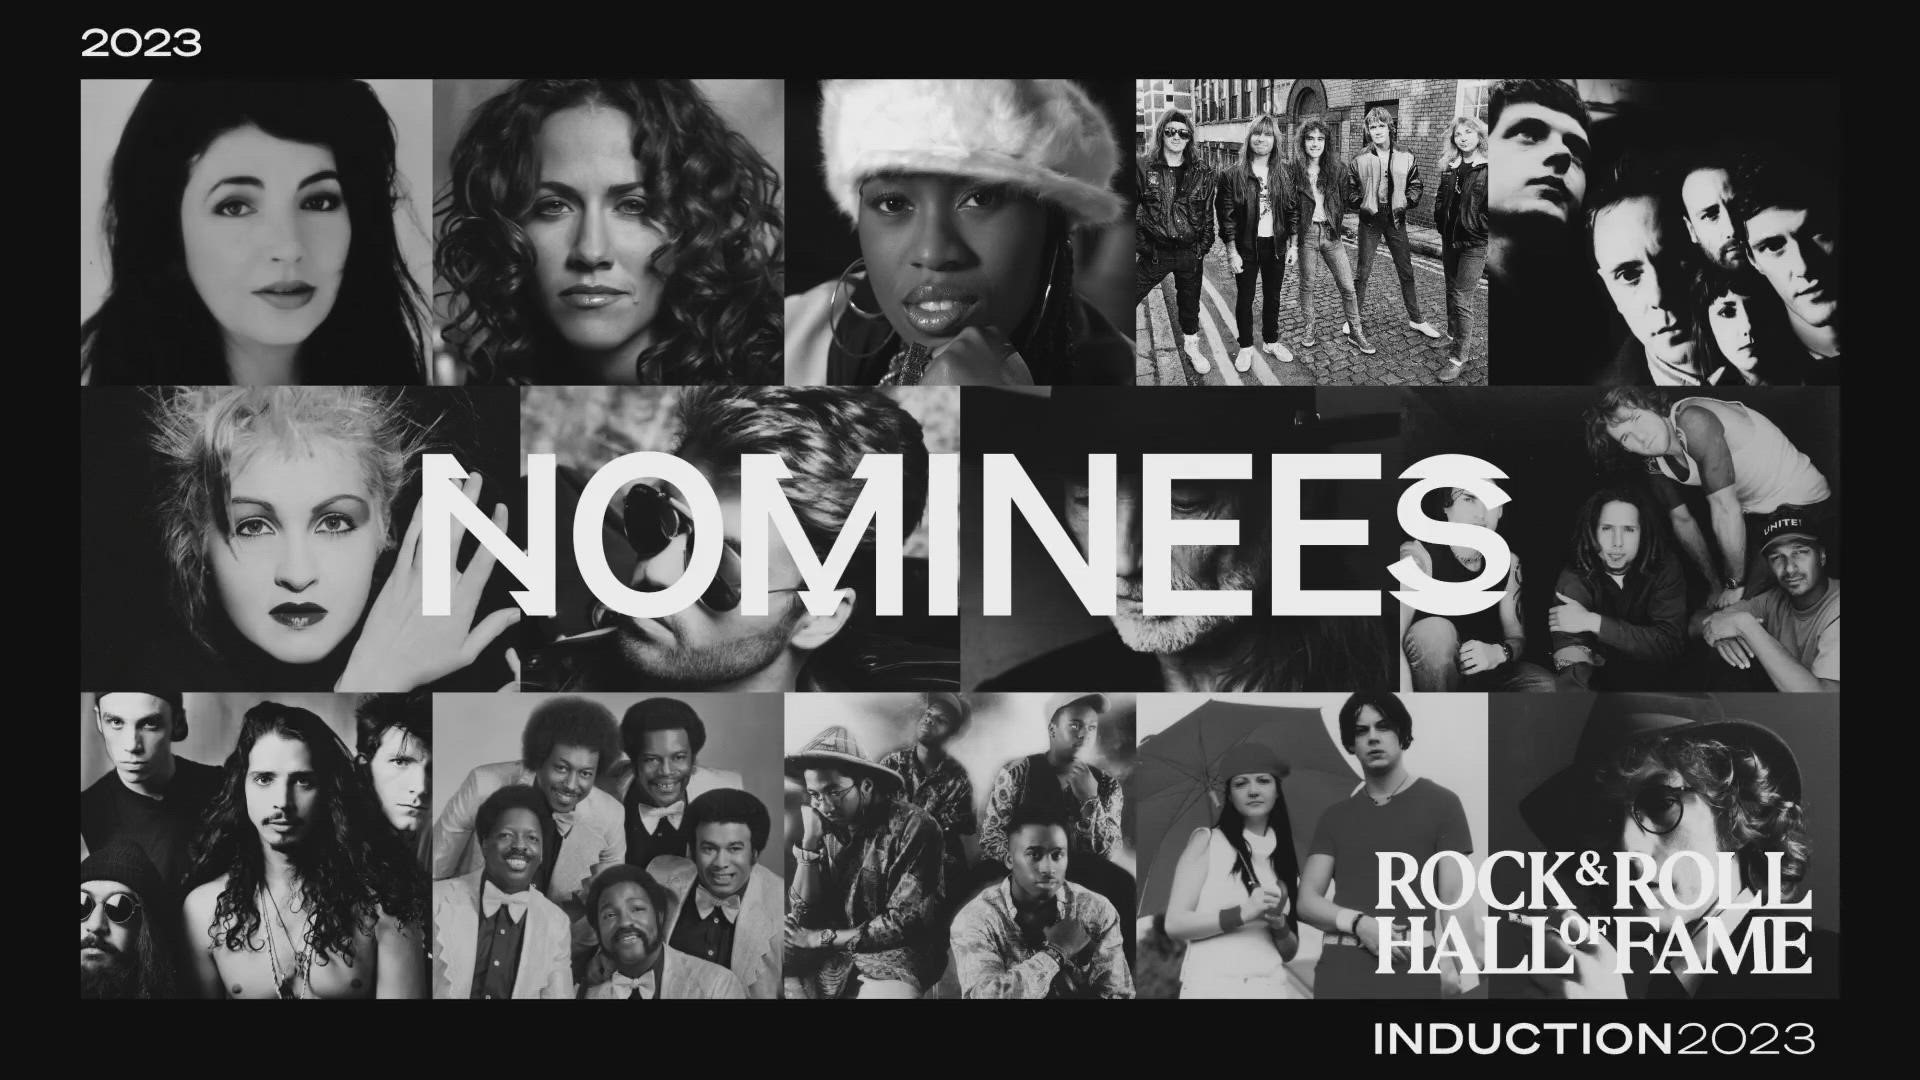 The list features eight first-time nominees, which include Missy Elliott, Willie Nelson, George Michael, The White Stripes, Sheryl Crow, Cyndi Lauper and more.